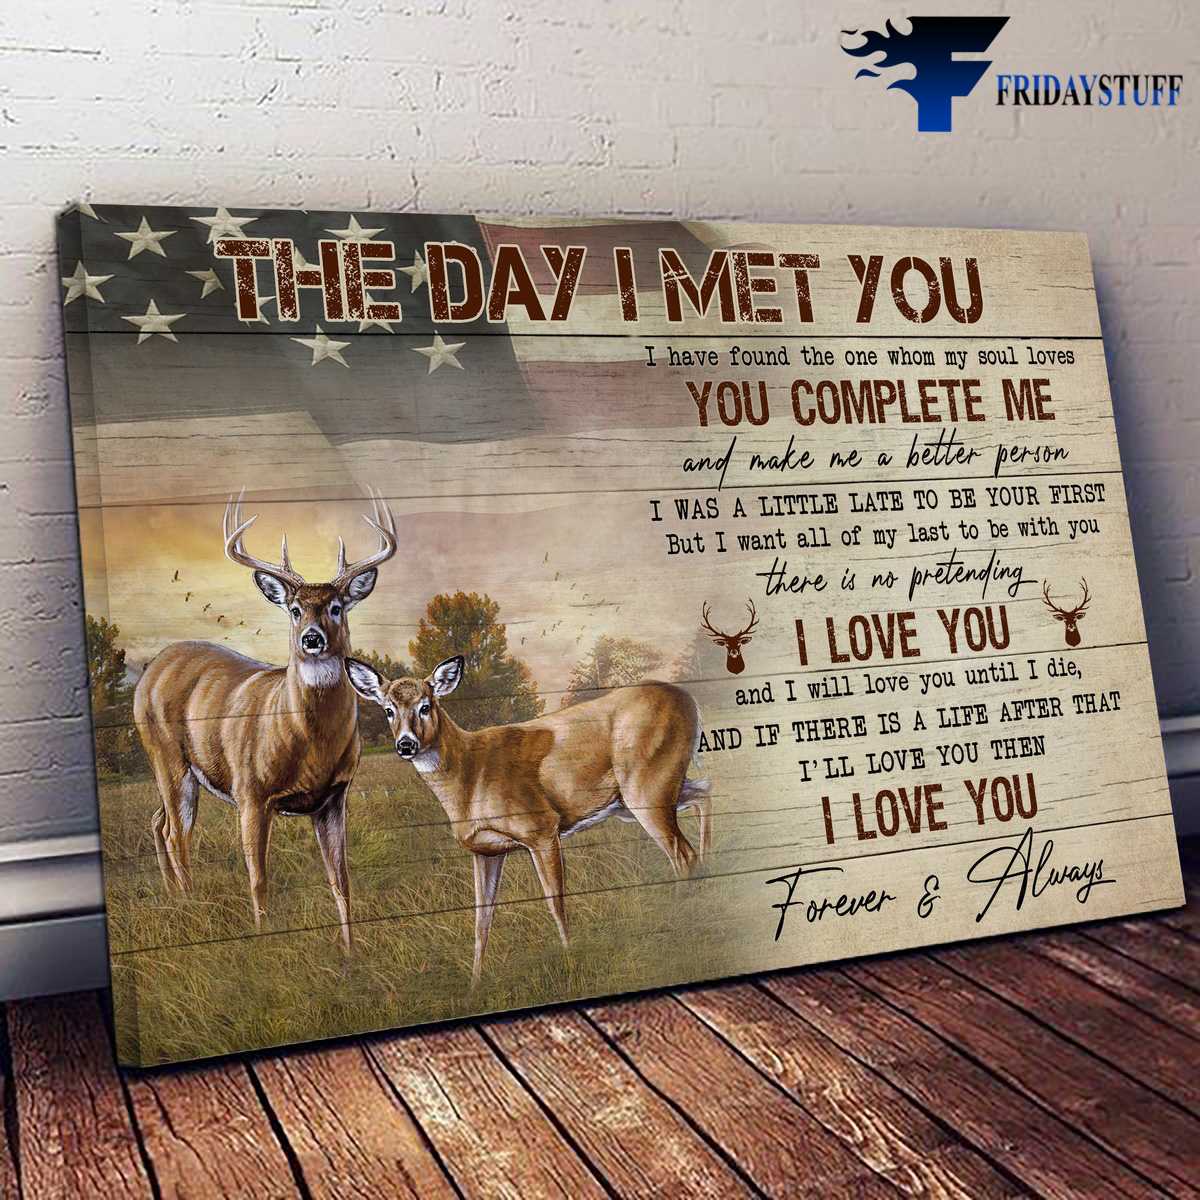 Deer Poster, Deer Couple, The Day I Met You, I Have Found The One, Whom My Soul Loves, You Complete Me, And Make Me A Better Person, I Was A Little Late To Be Your First